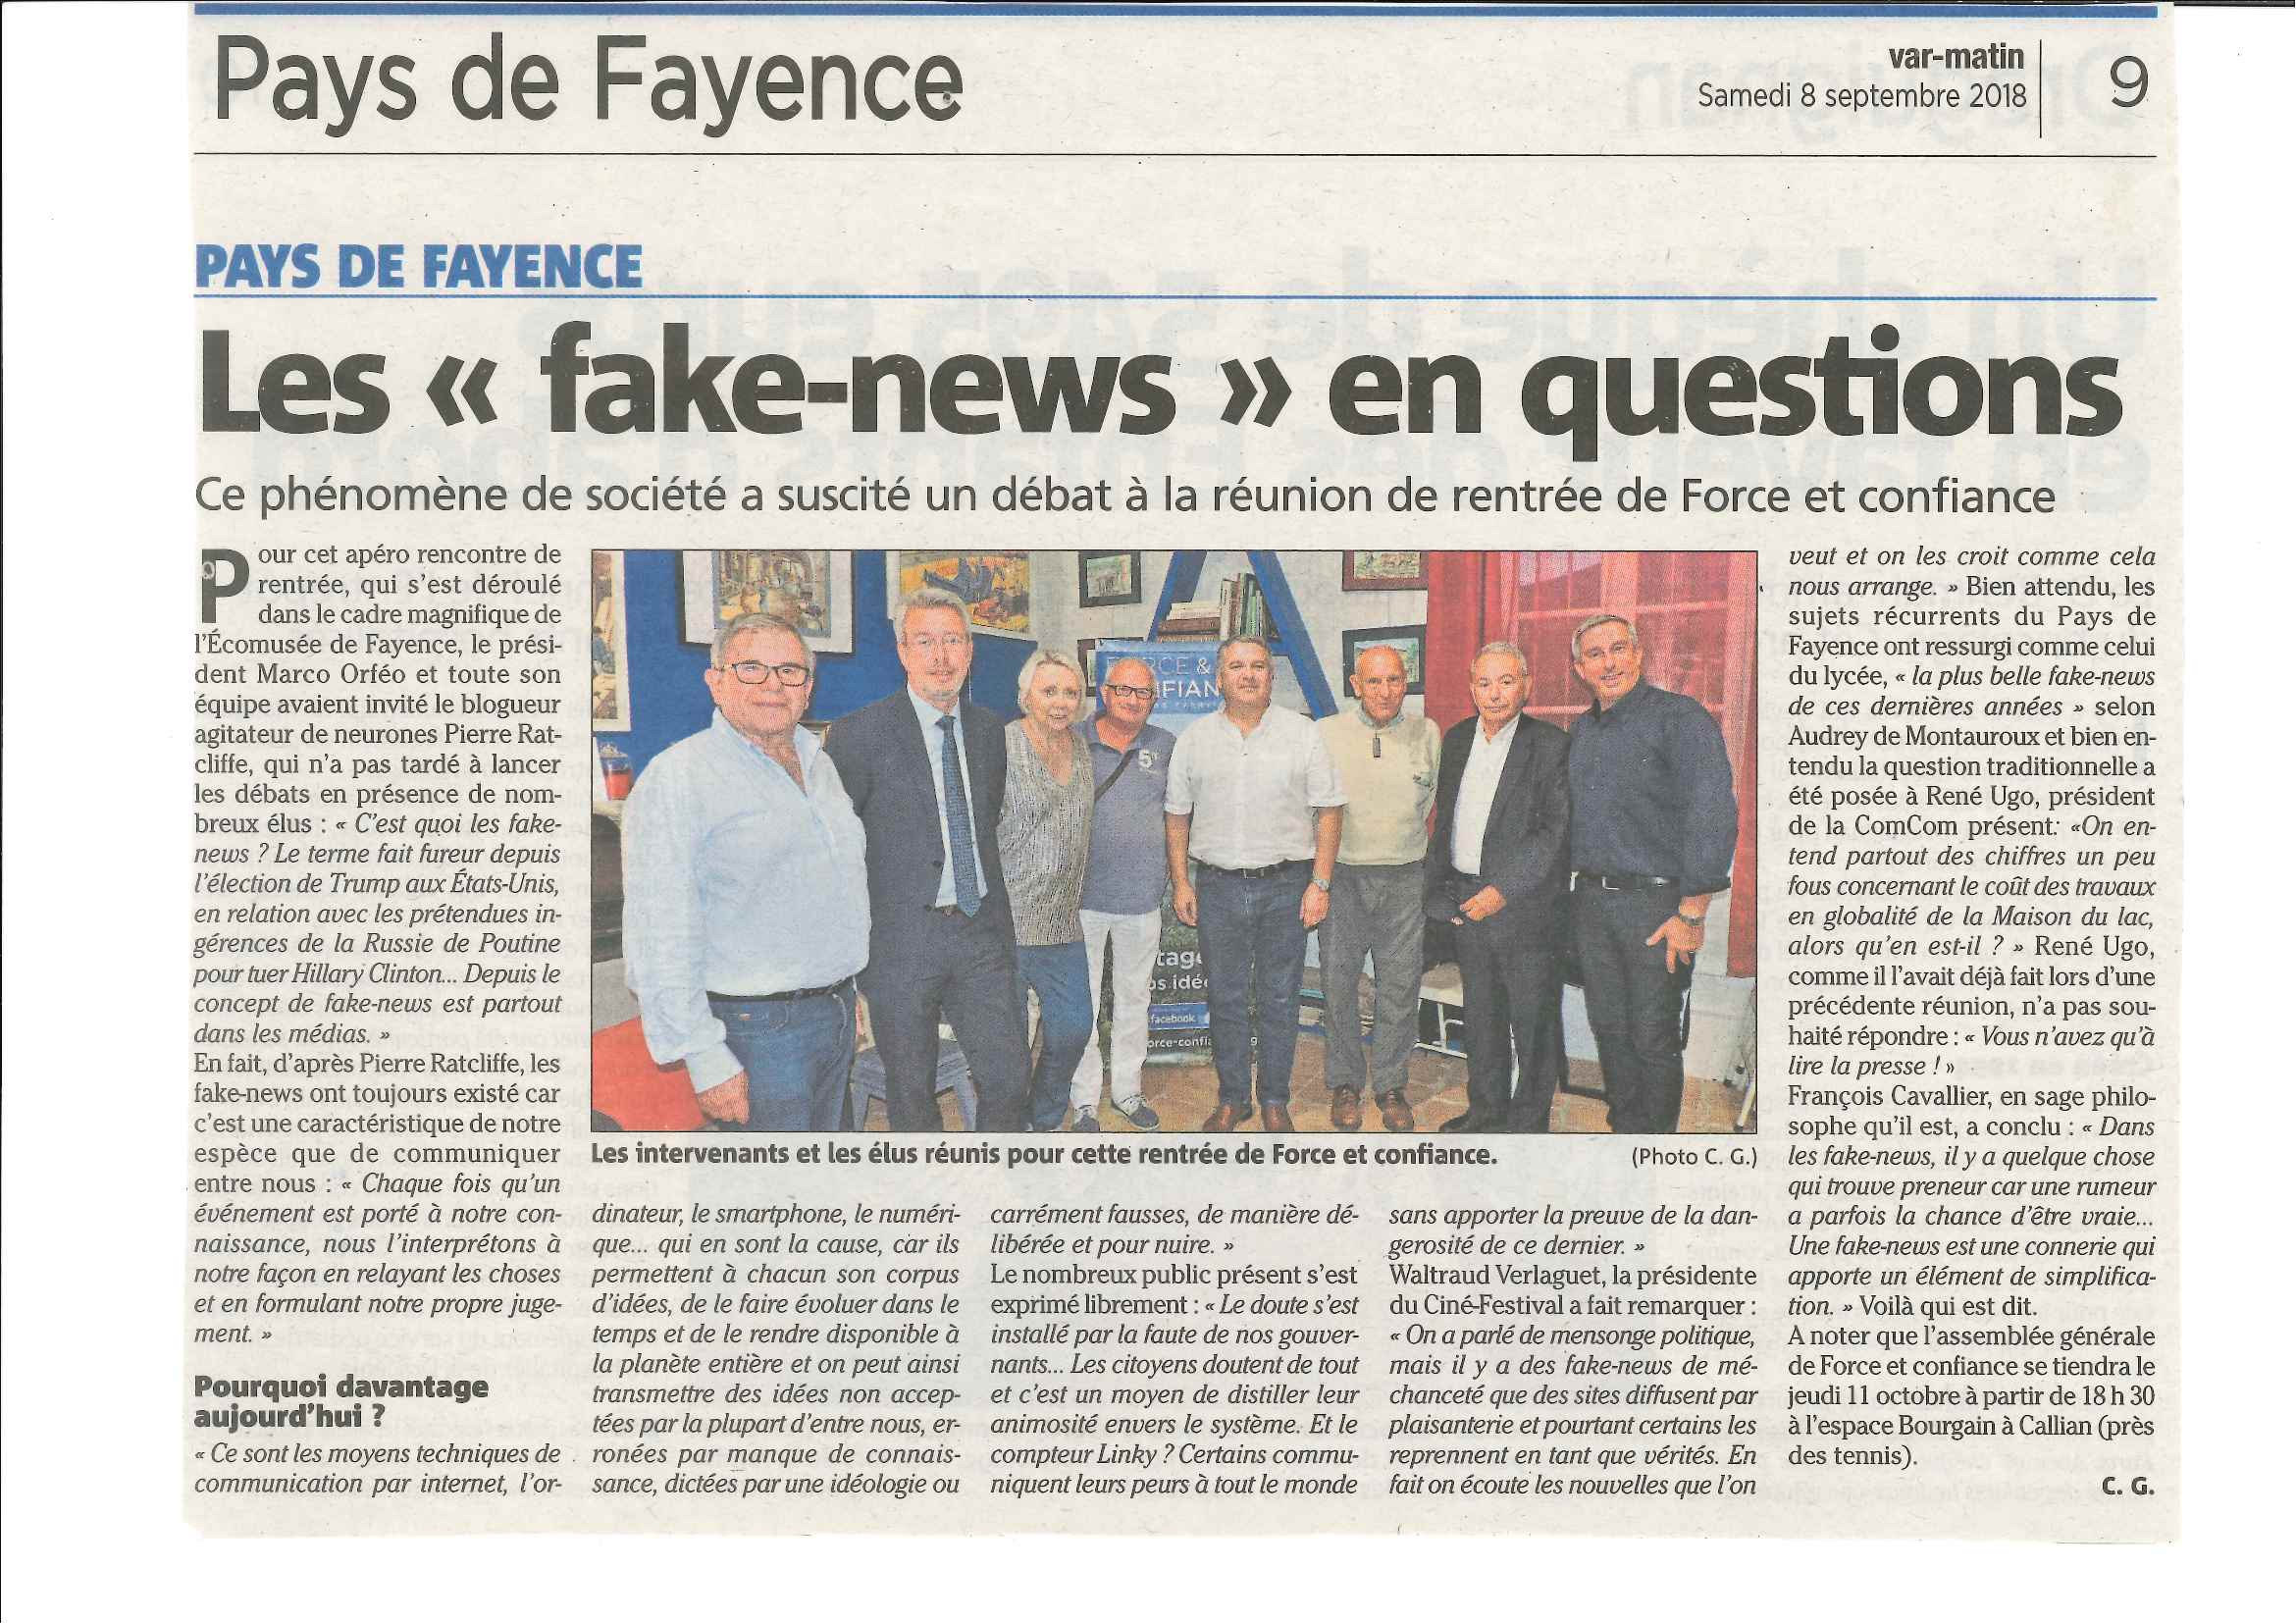 Les Fake-Newsen questions